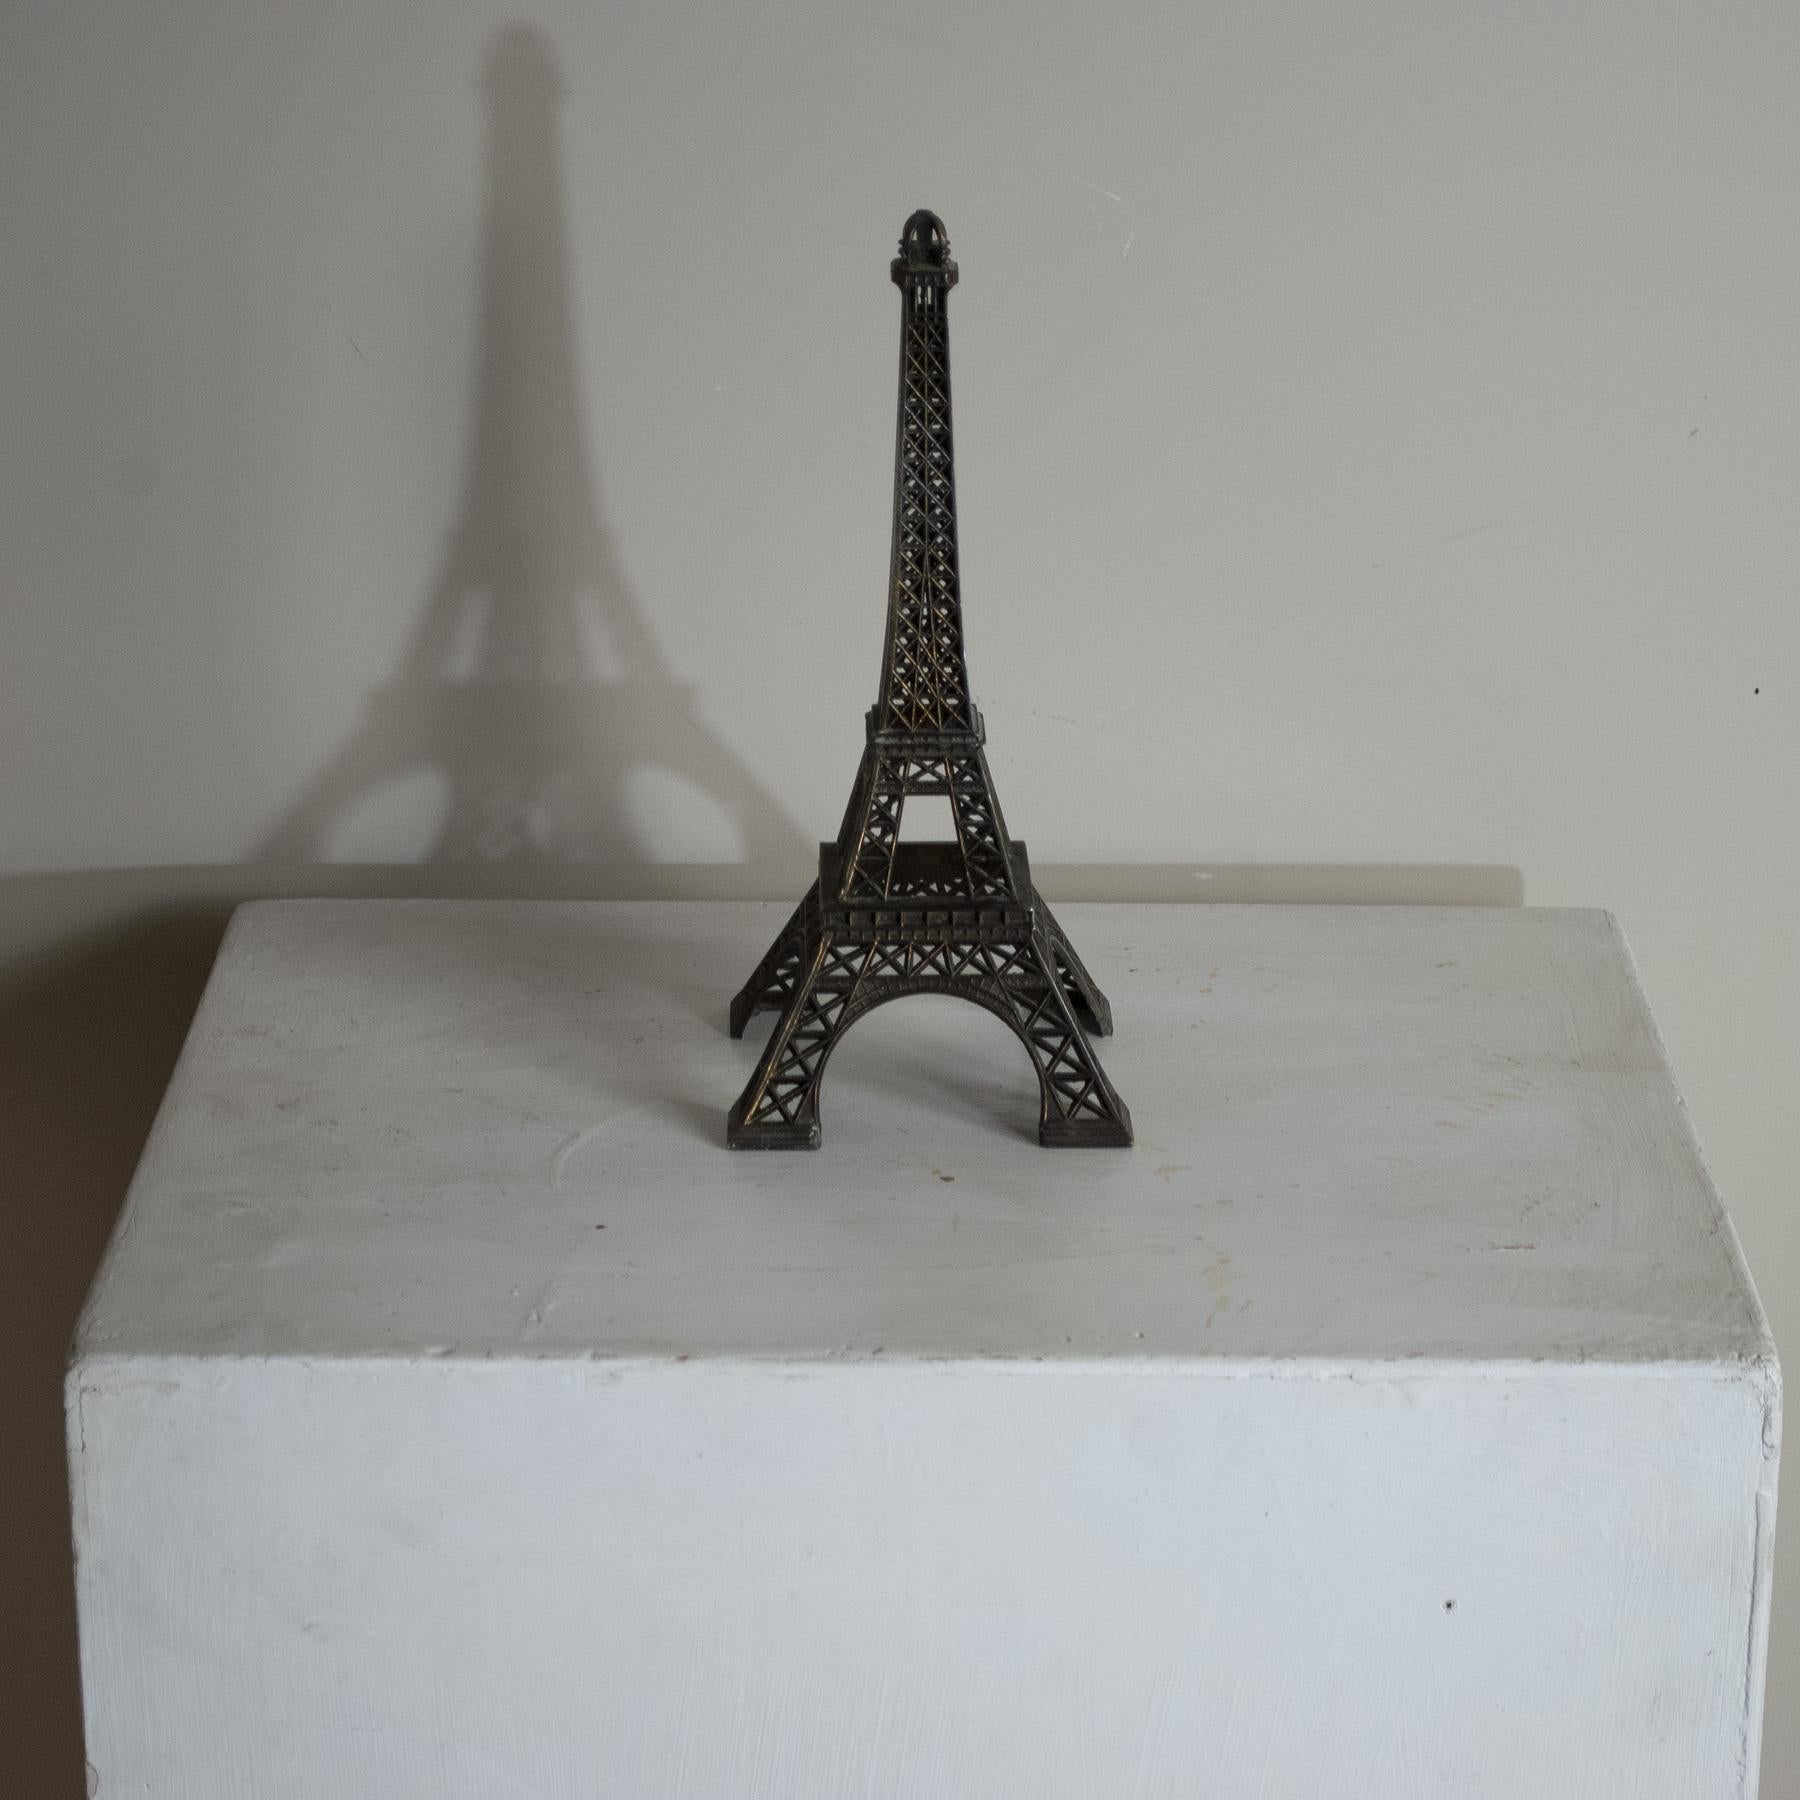 Original decorative object depicting the Eiffel Tower, brass fusion, 1960s production.